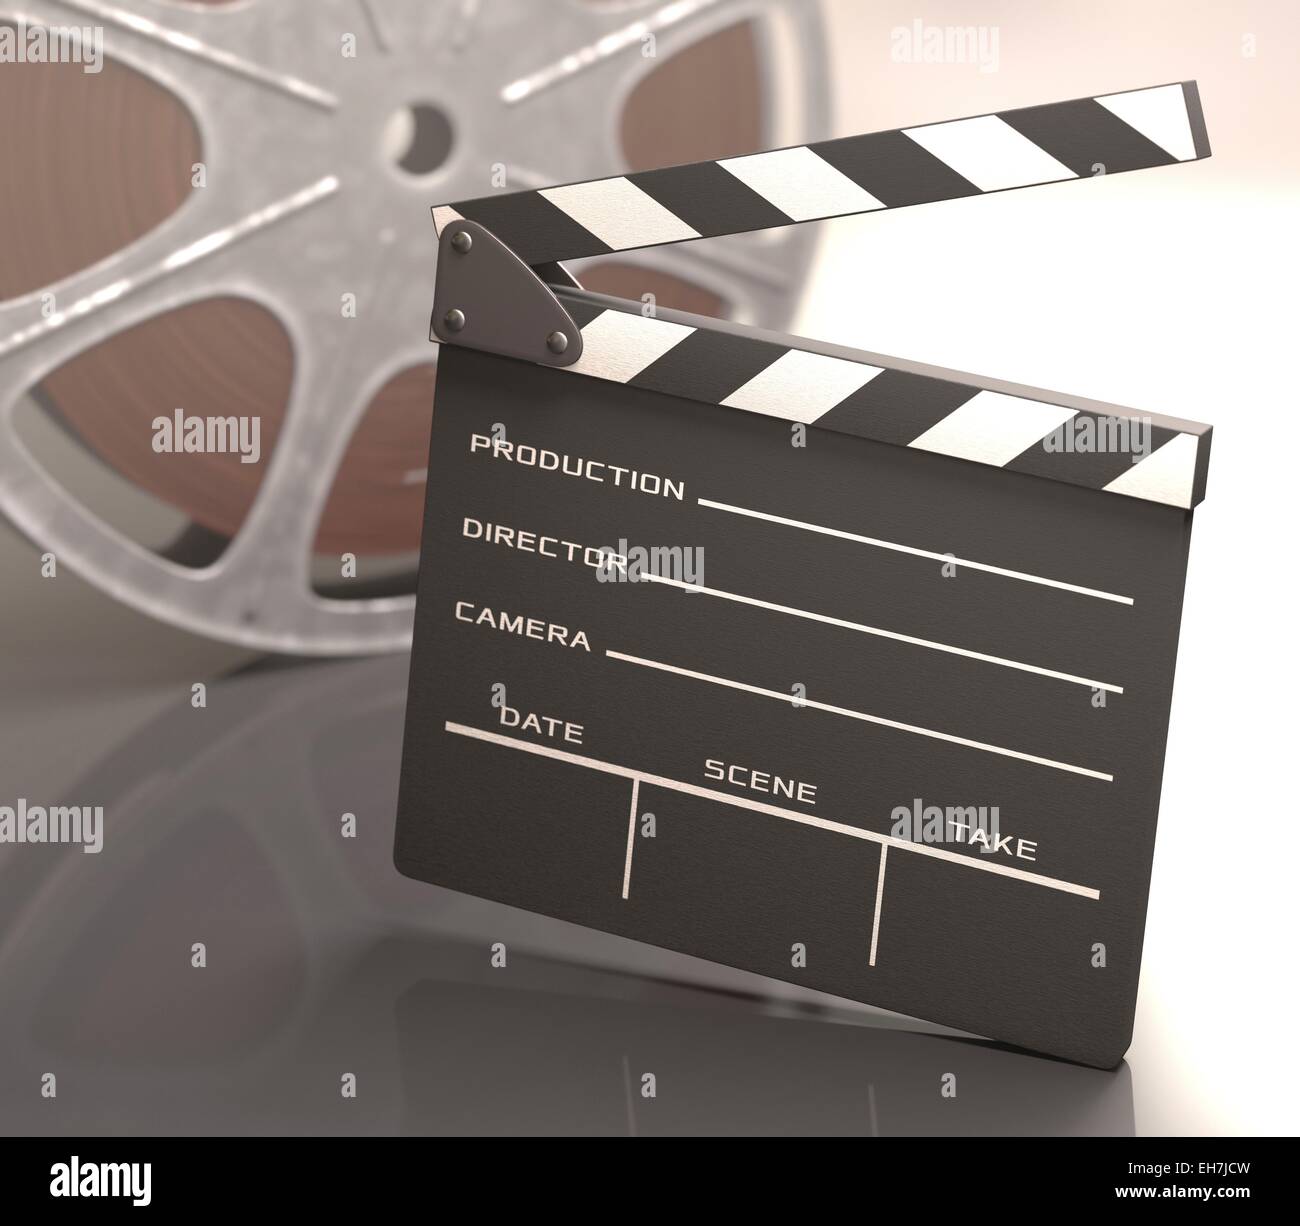 Clapperboard and movie reel, illustration Stock Photo